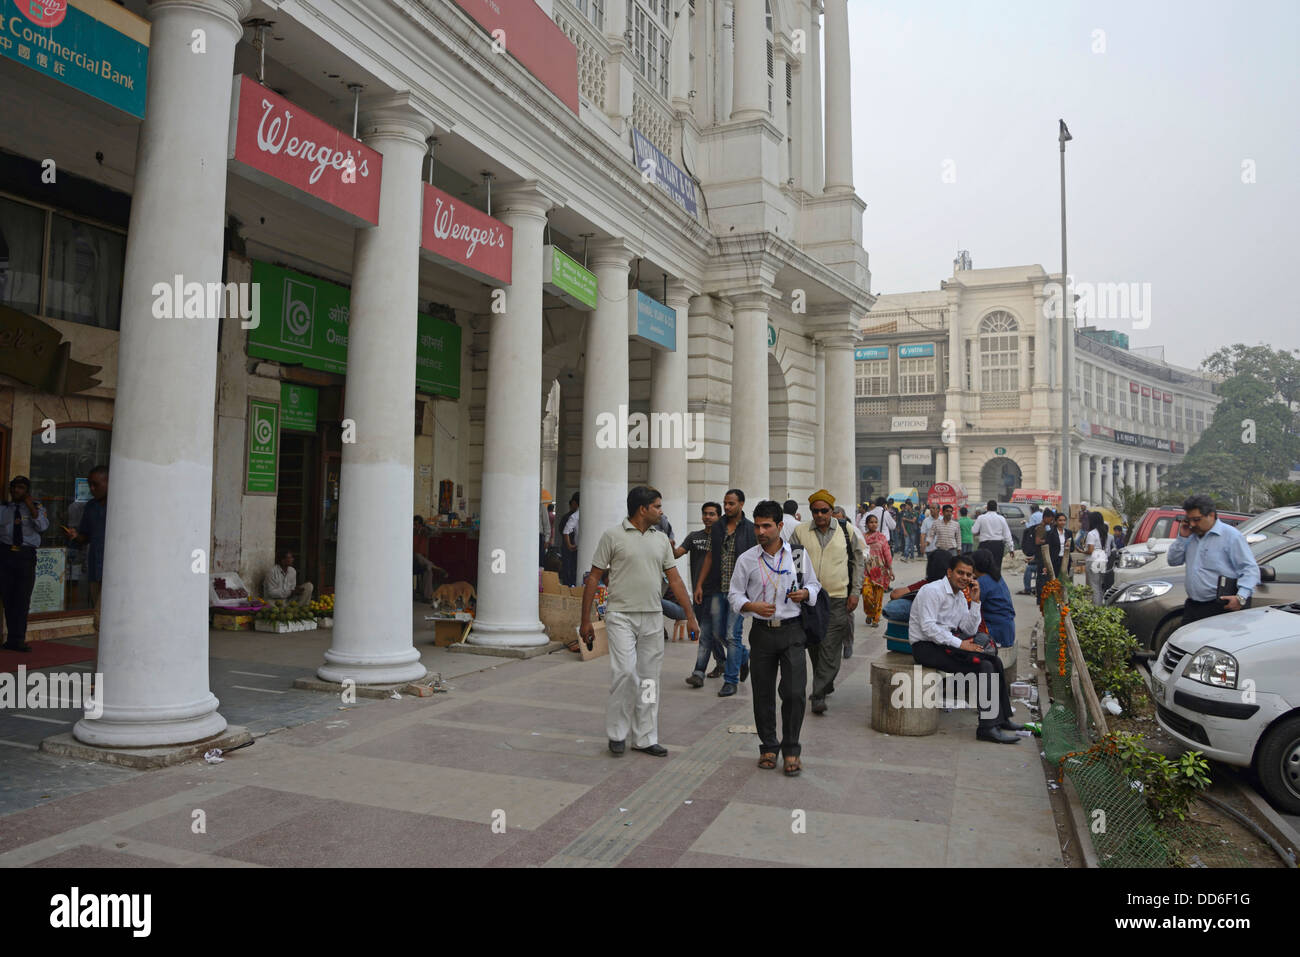 Connaught Place, shopping complex in New Delhi, India was built by